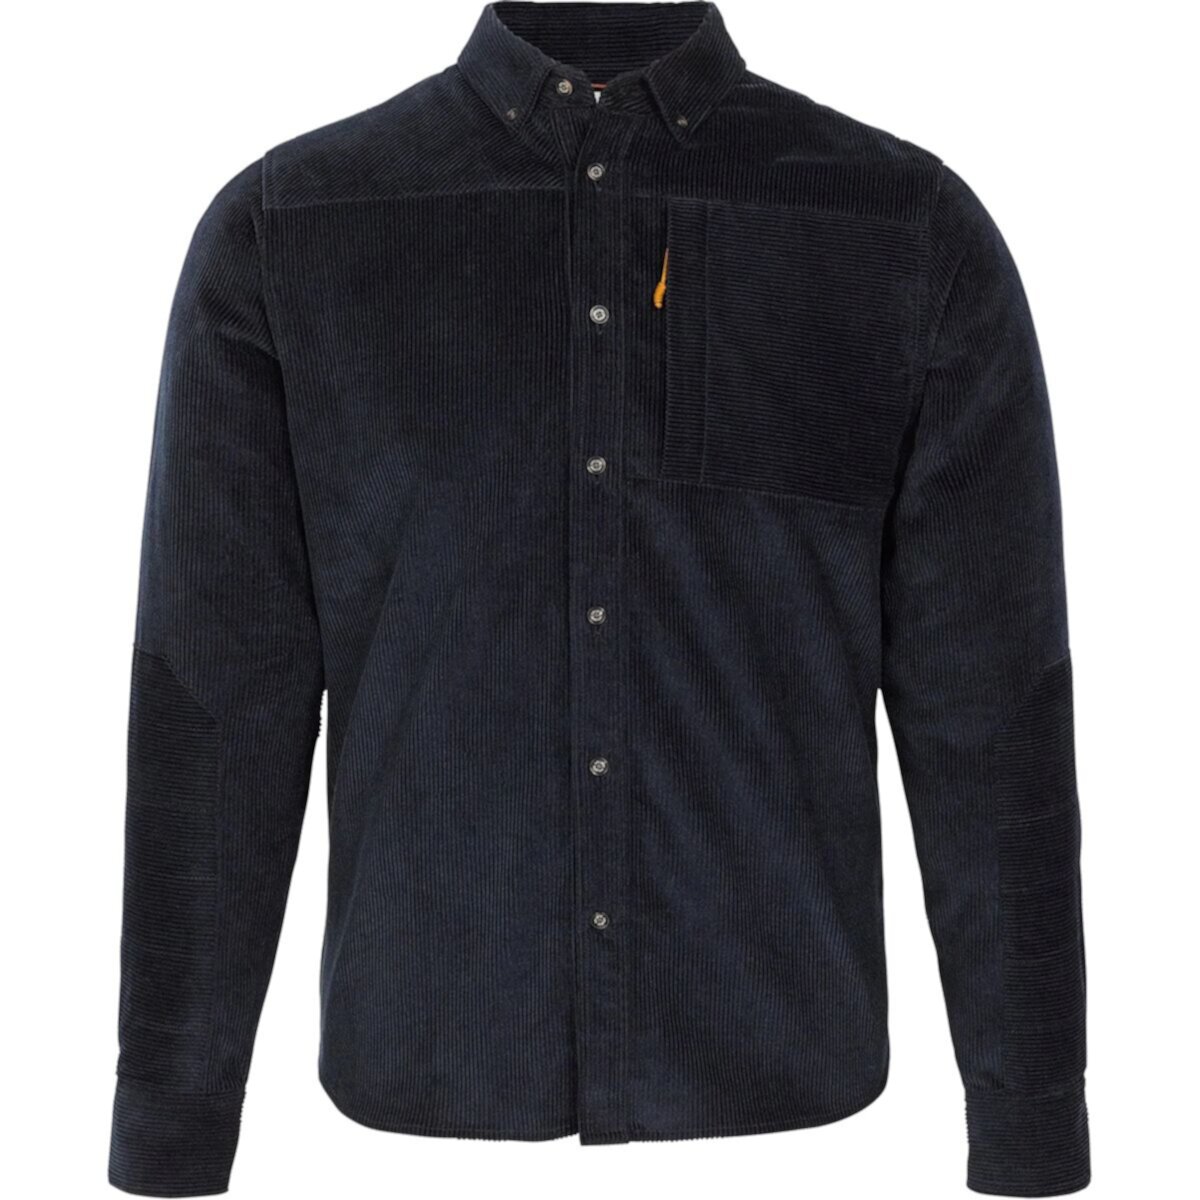 Touring Oxford High West Shirt Alps & Meters